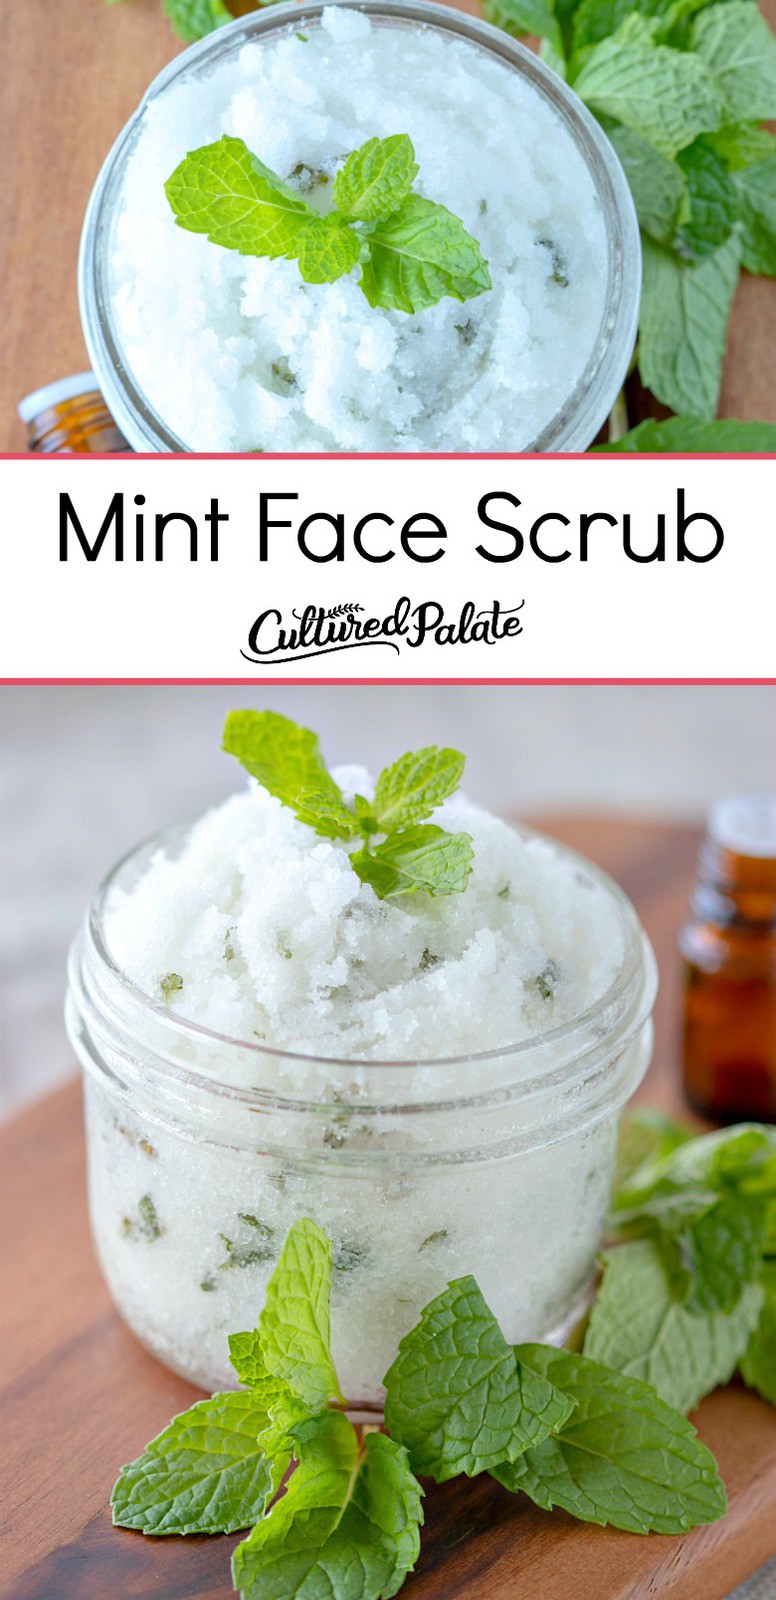 Mint Face Scrub, a homemade sugar scrub shown in glass jar in two images, both on cutting board with text overlay.